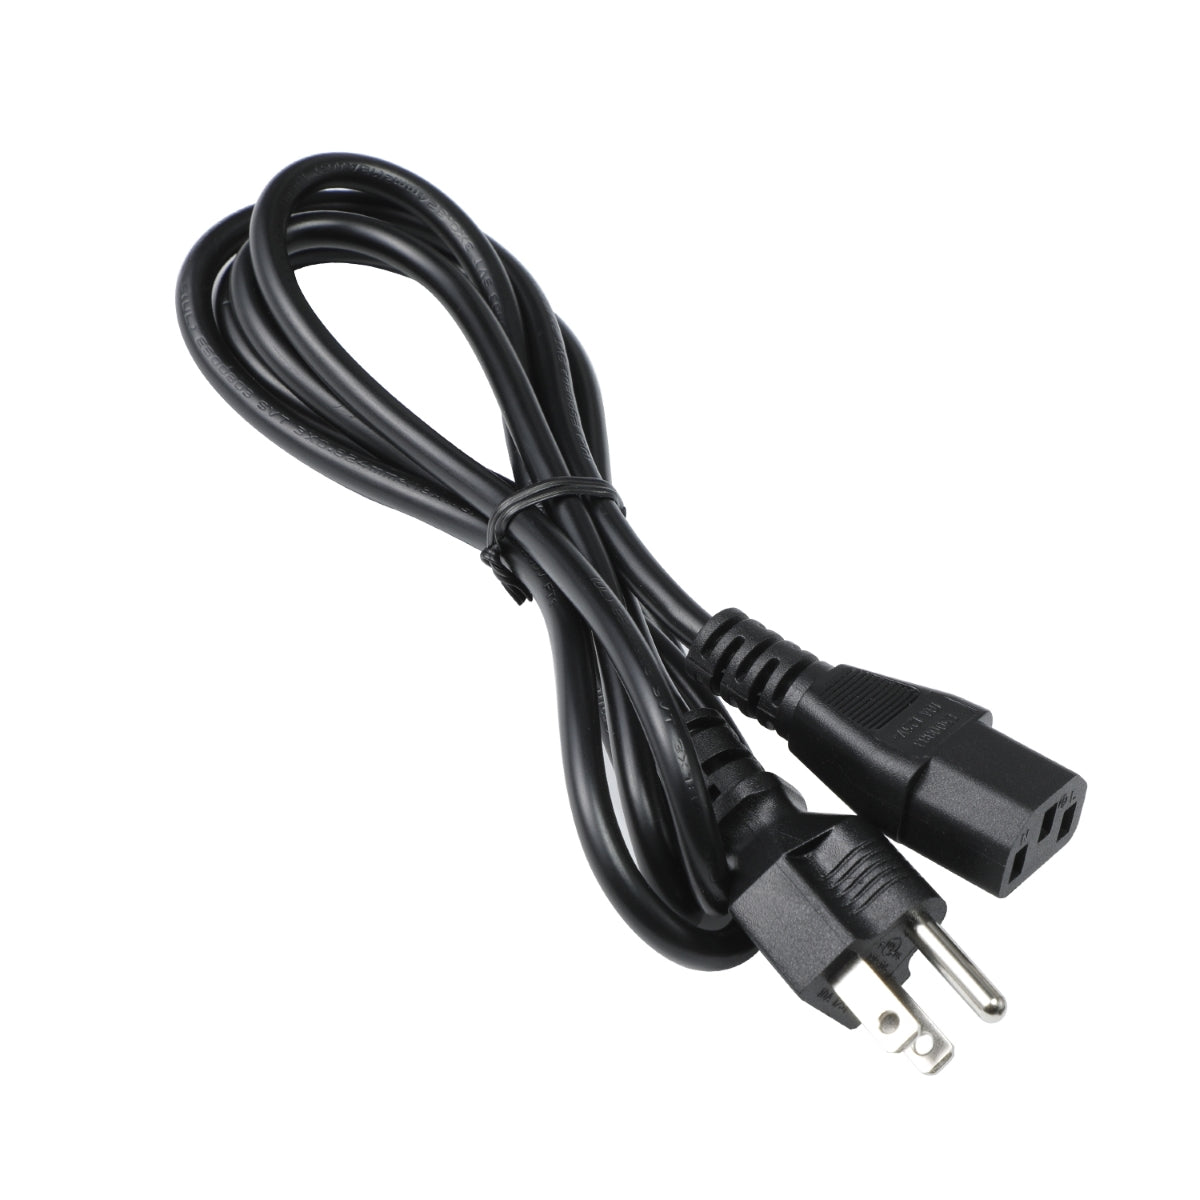 Power Cord for BenQ PD2700U IPS Monitor